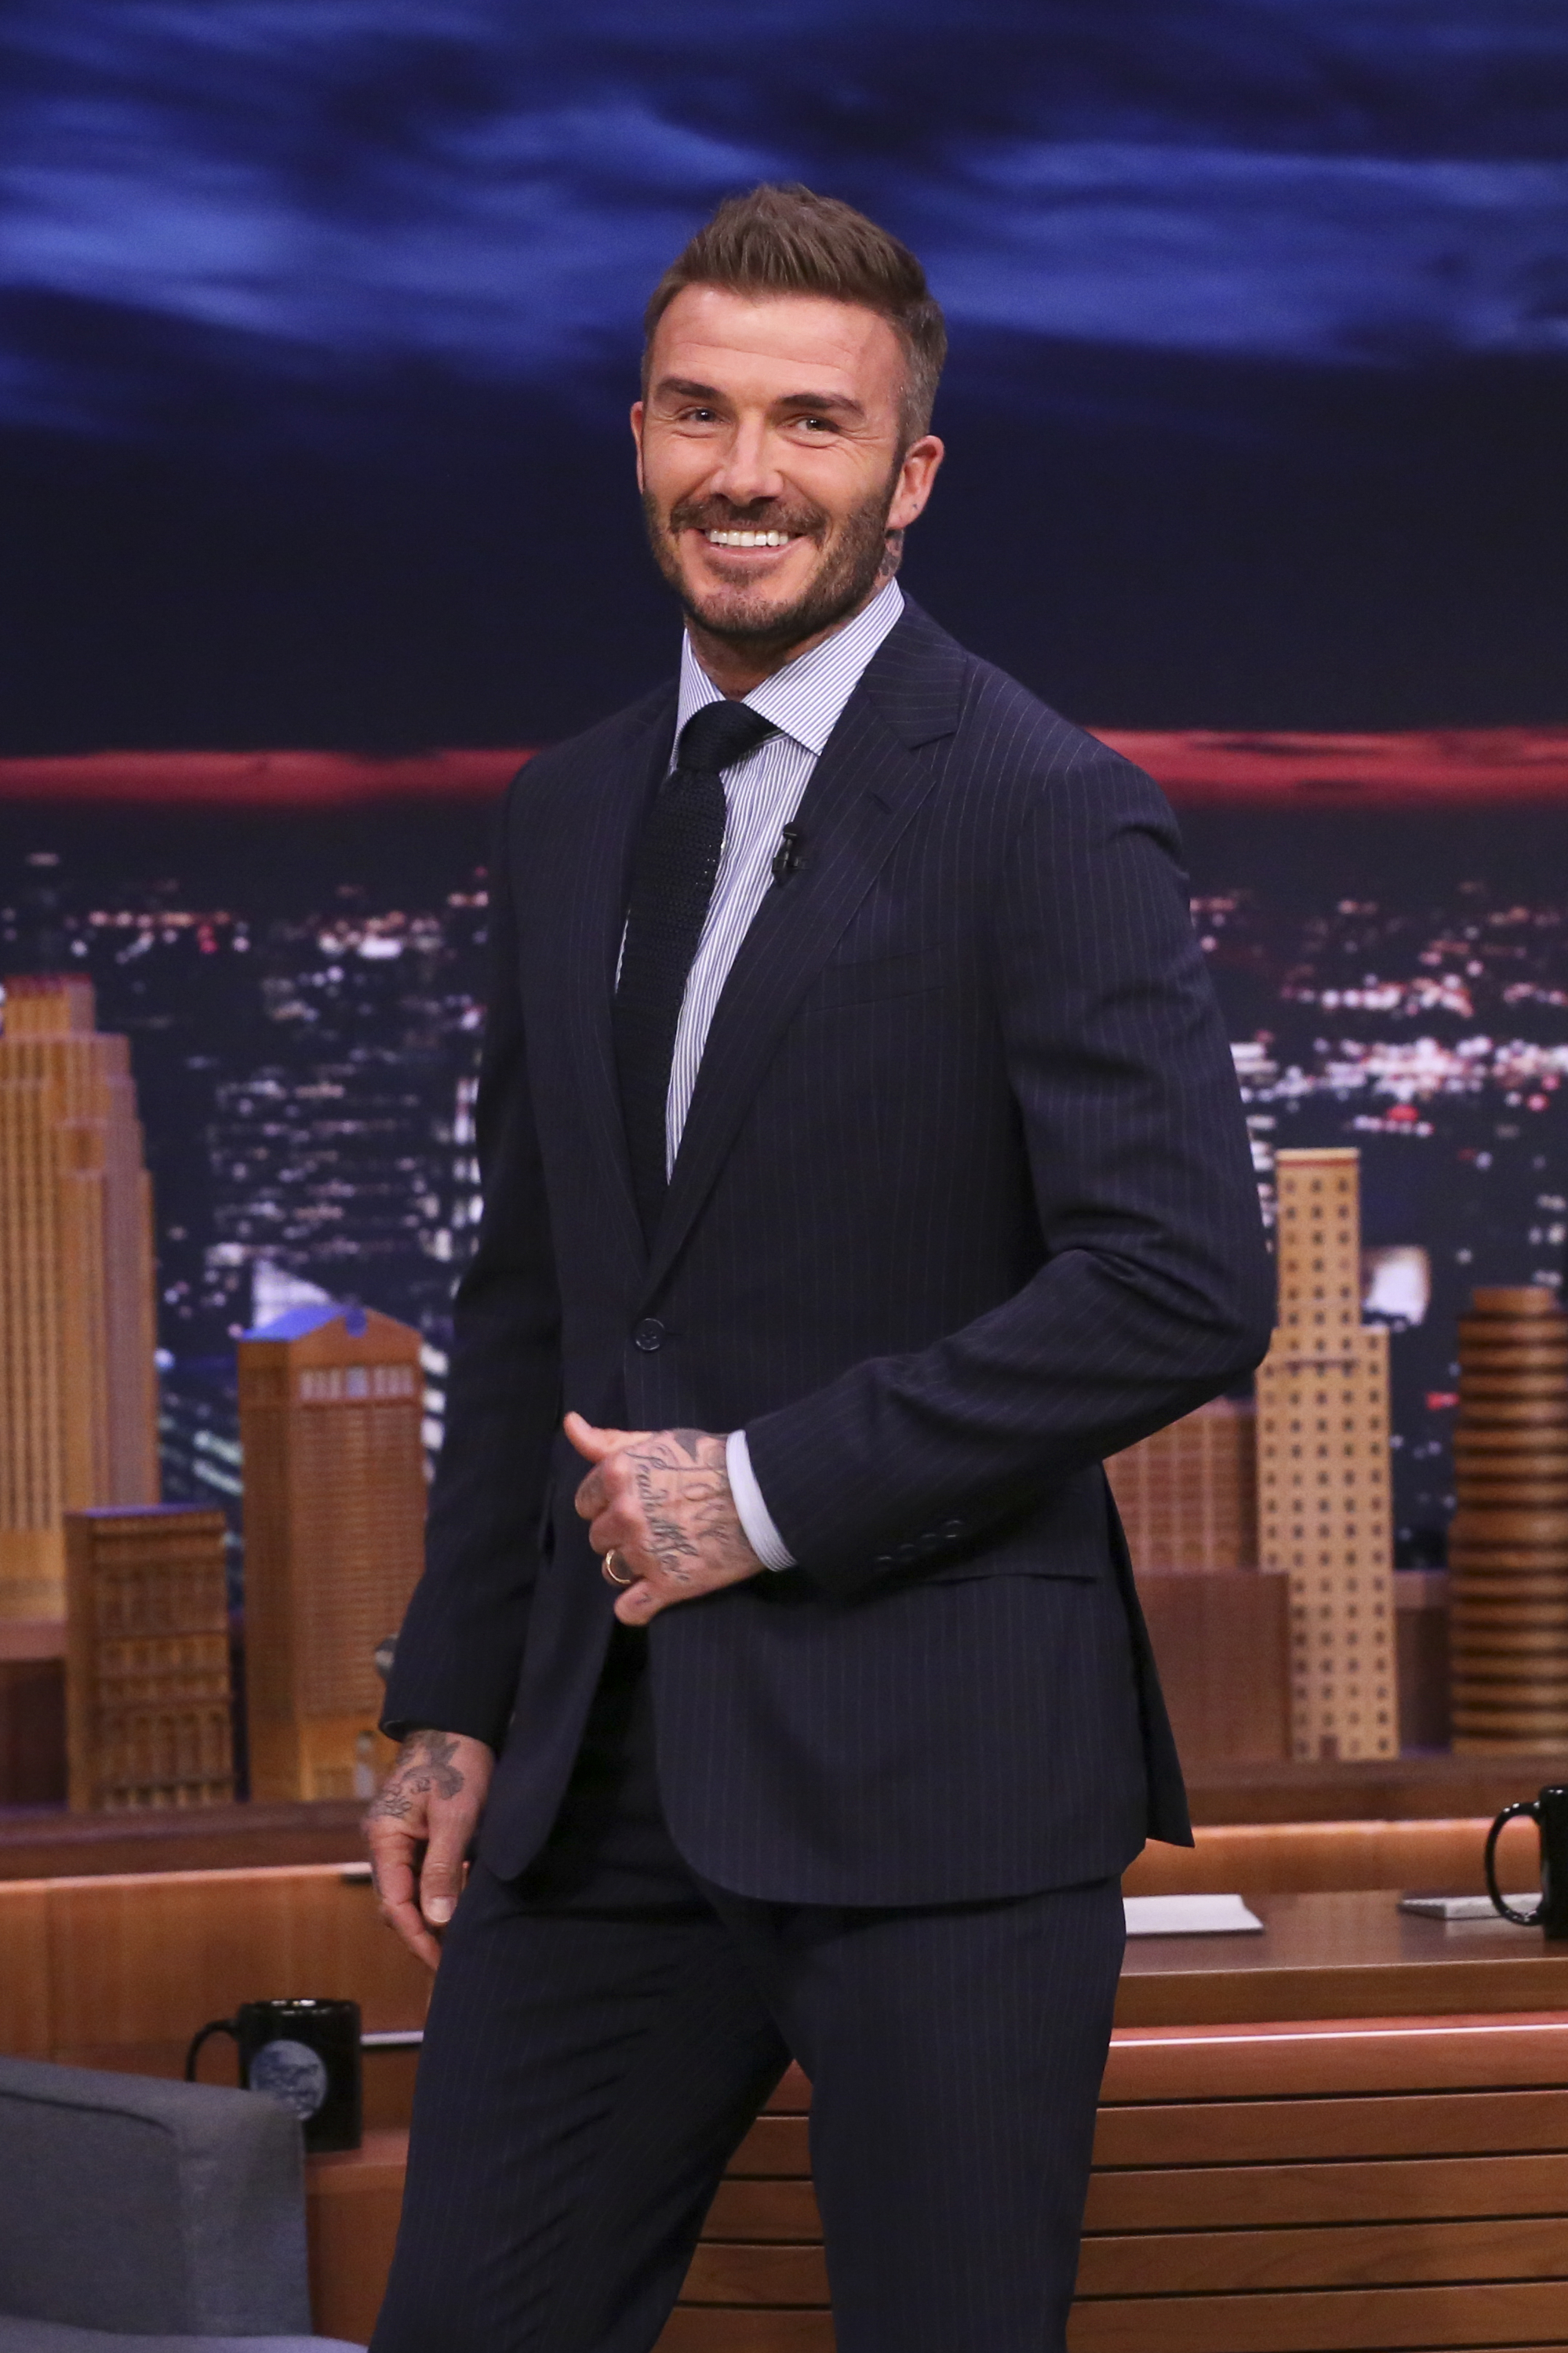 David Beckham at "The Tonight Show with Jimmy Fallon" on February 26, 2020 | Source: Getty Images